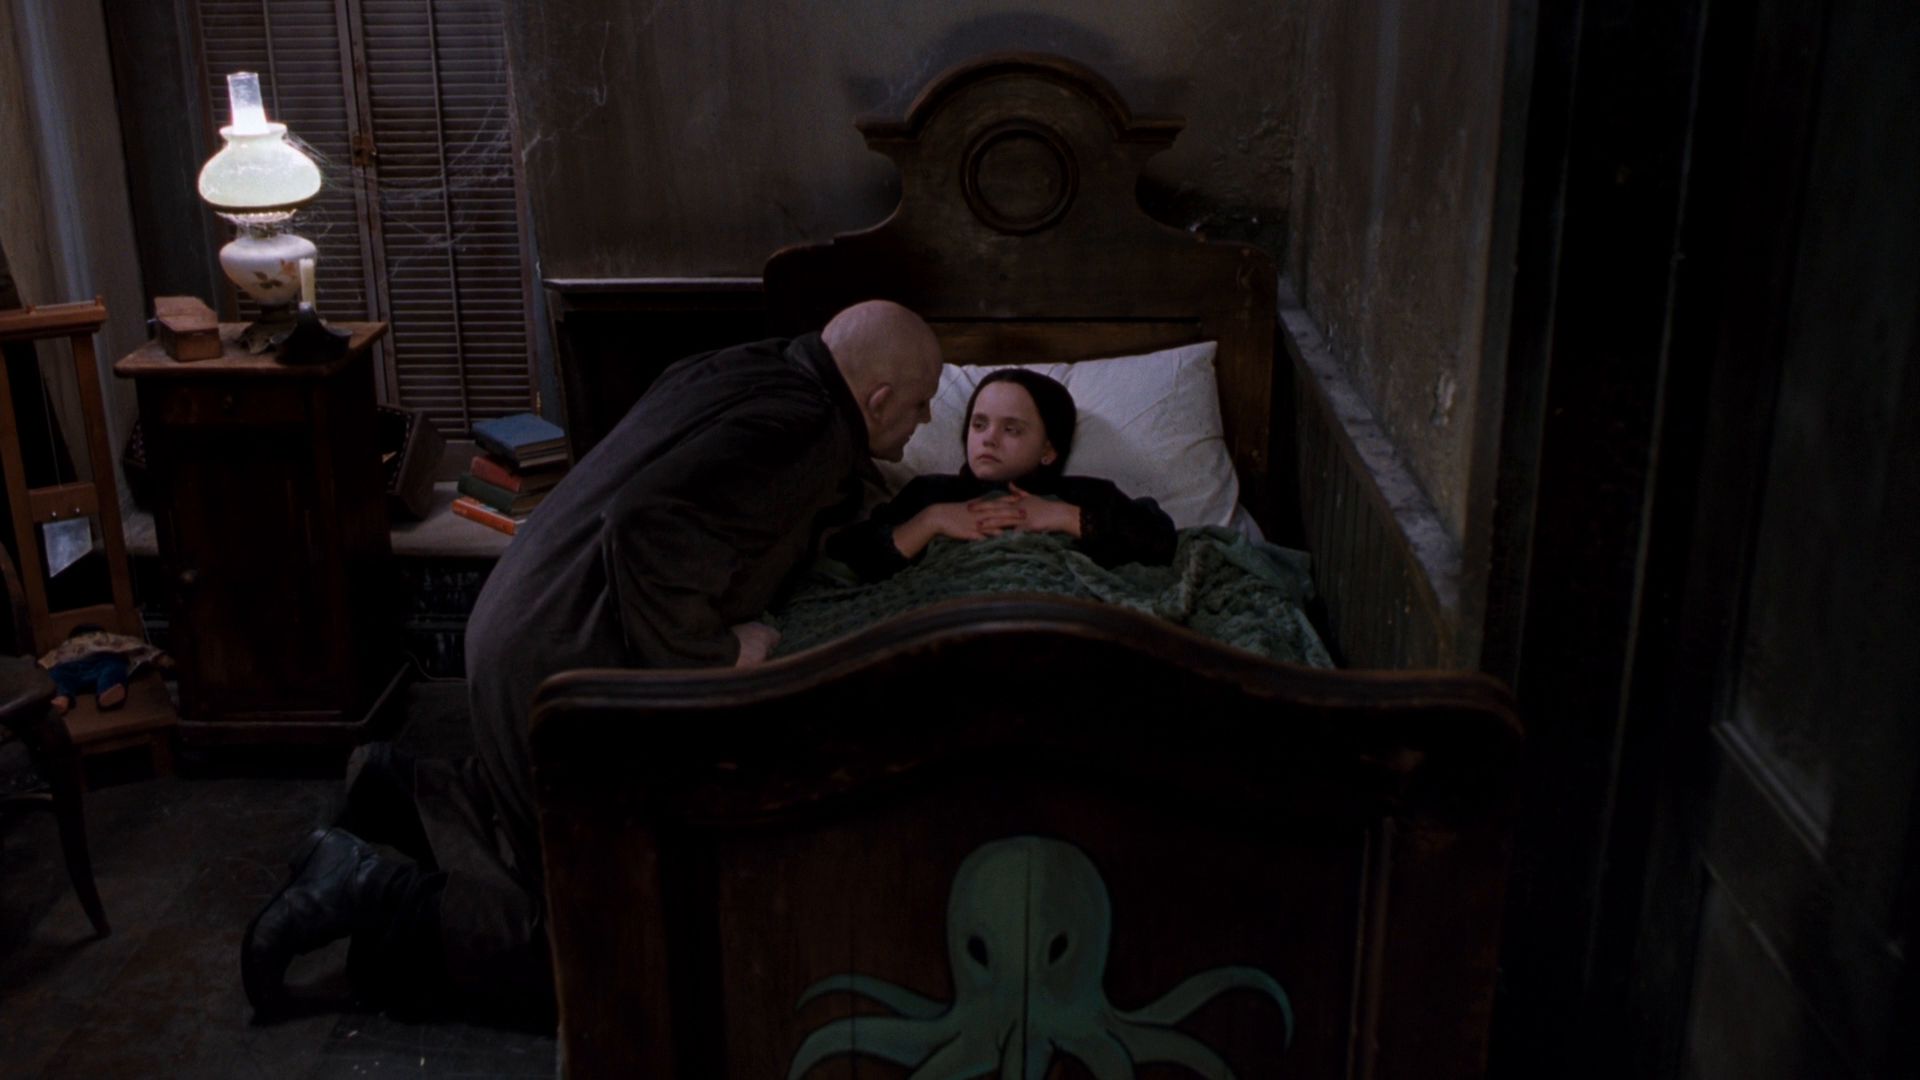 movie, the addams family (1991), christina ricci, christopher lloyd, uncle fester, wednesday addams, the addams family